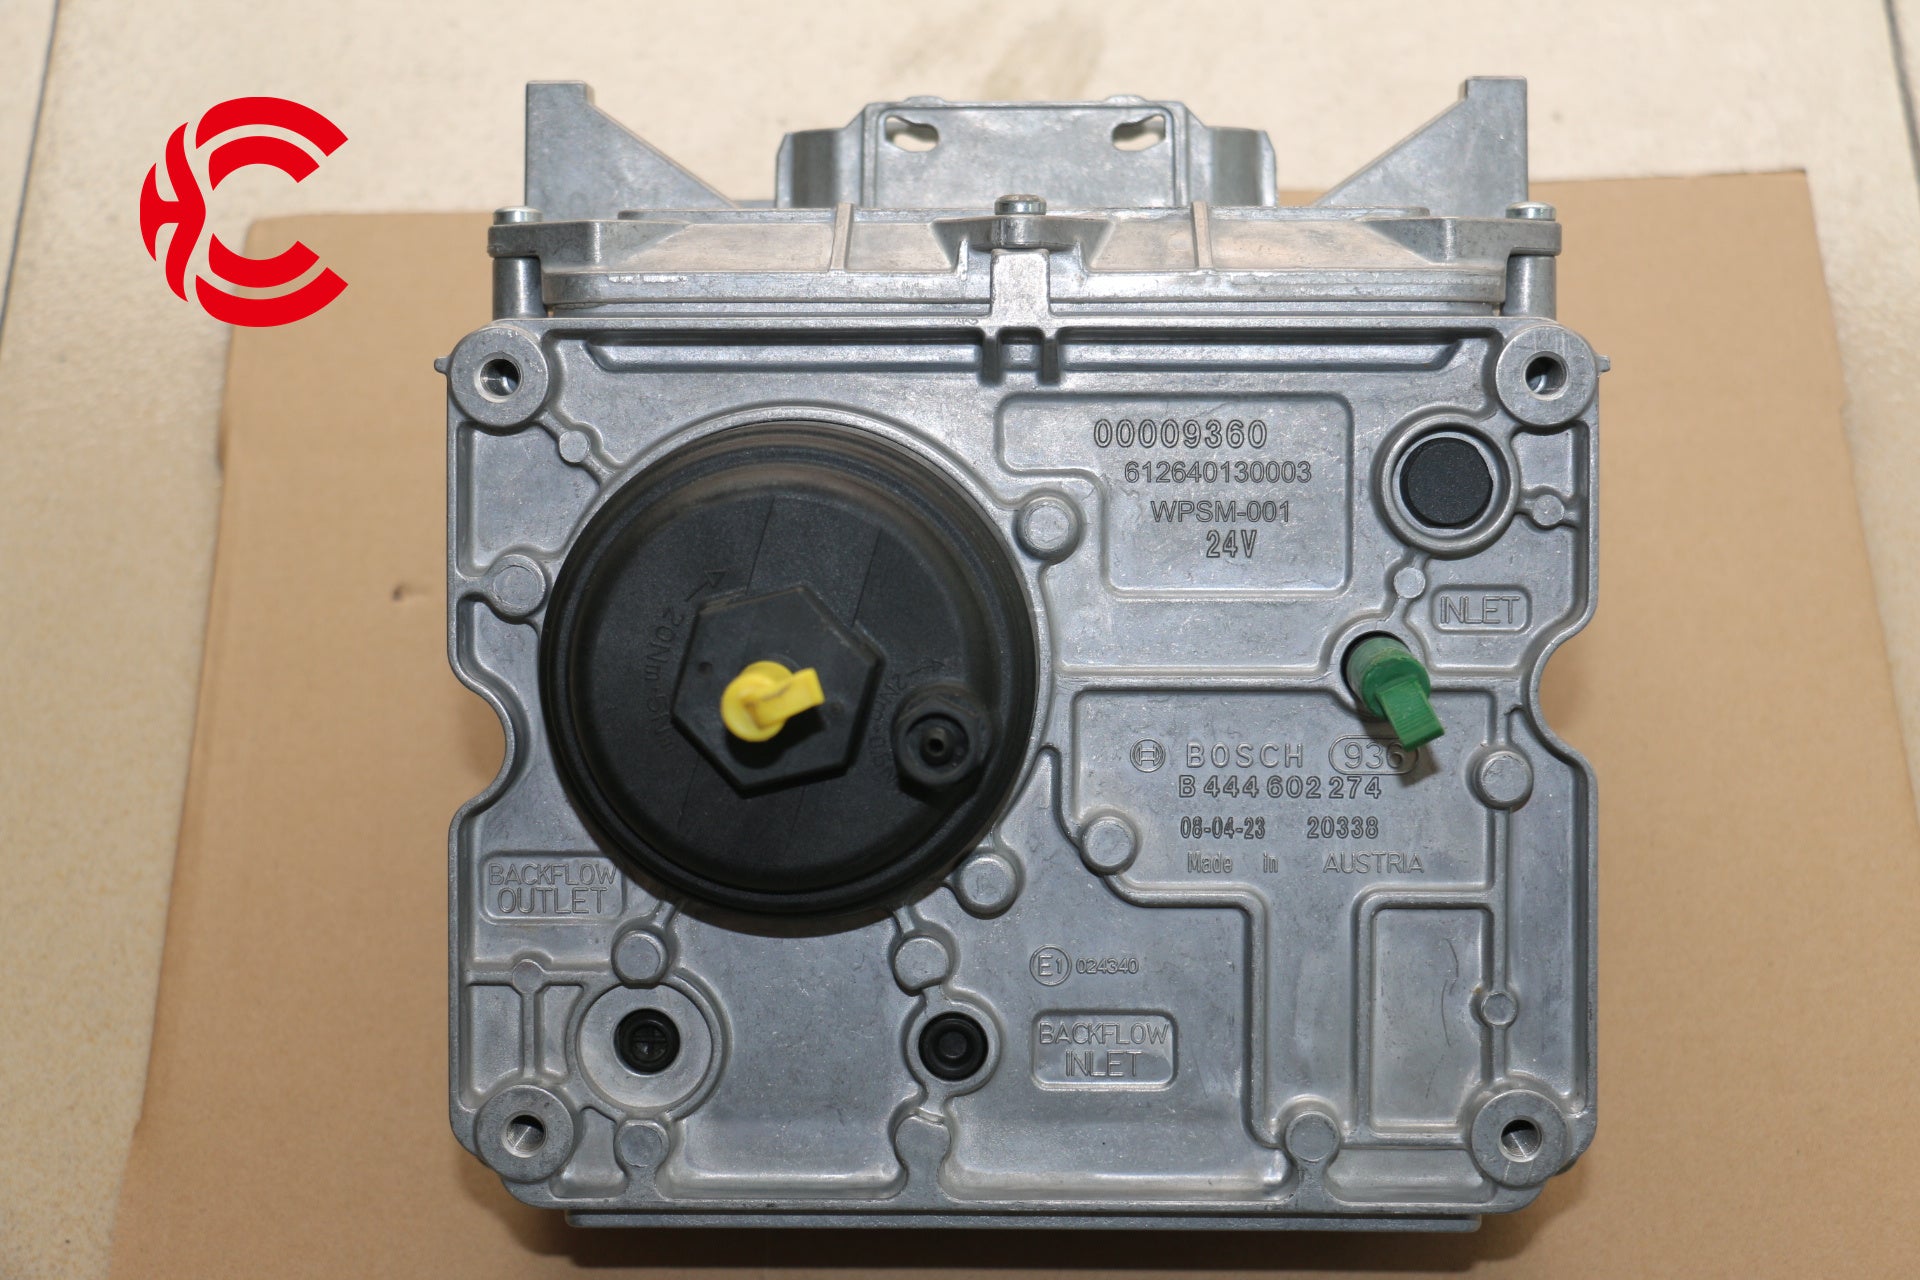 OEM: 612640130003 0444602274Material: ABS metalColor: black silverOrigin: Made in ChinaWeight: 1000gPacking List: 1* Adblue Pump More ServiceWe can provide OEM Manufacturing serviceWe can Be your one-step solution for Auto PartsWe can provide technical scheme for you Feel Free to Contact Us, We will get back to you as soon as possible.